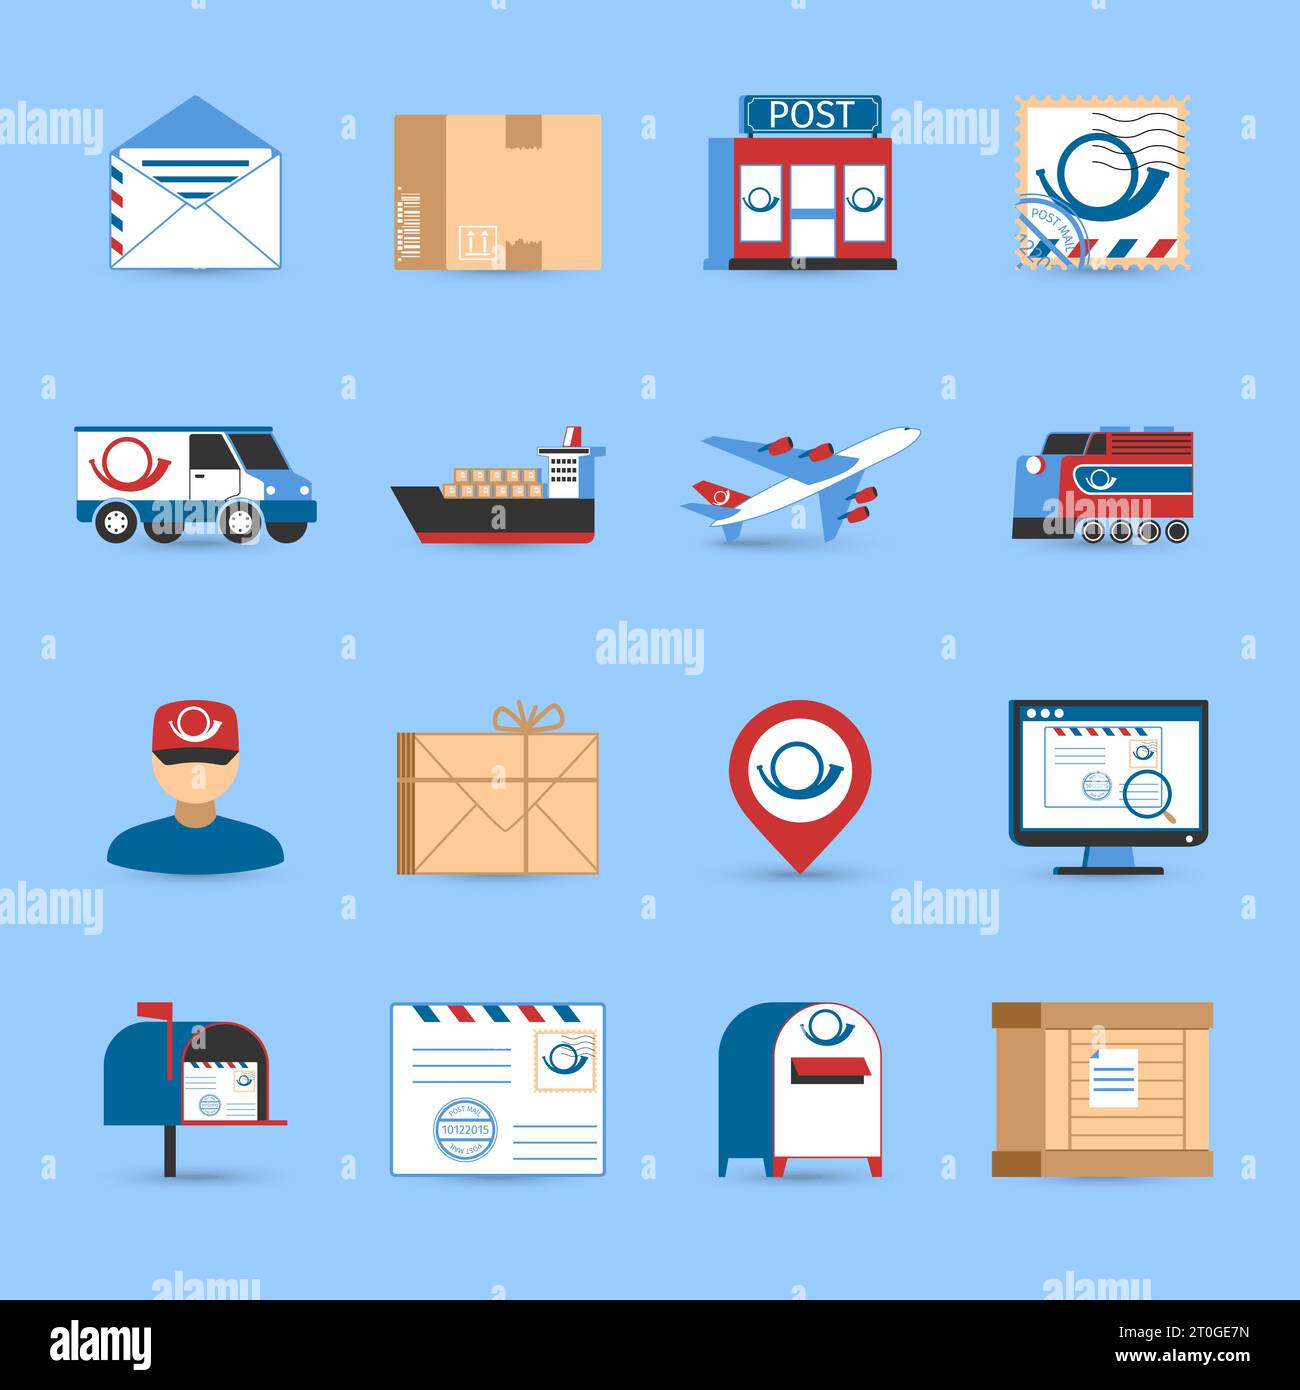 Post icons set with plane train and truck transportation symbols on blue background flat isolated vector illustration Stock Vector